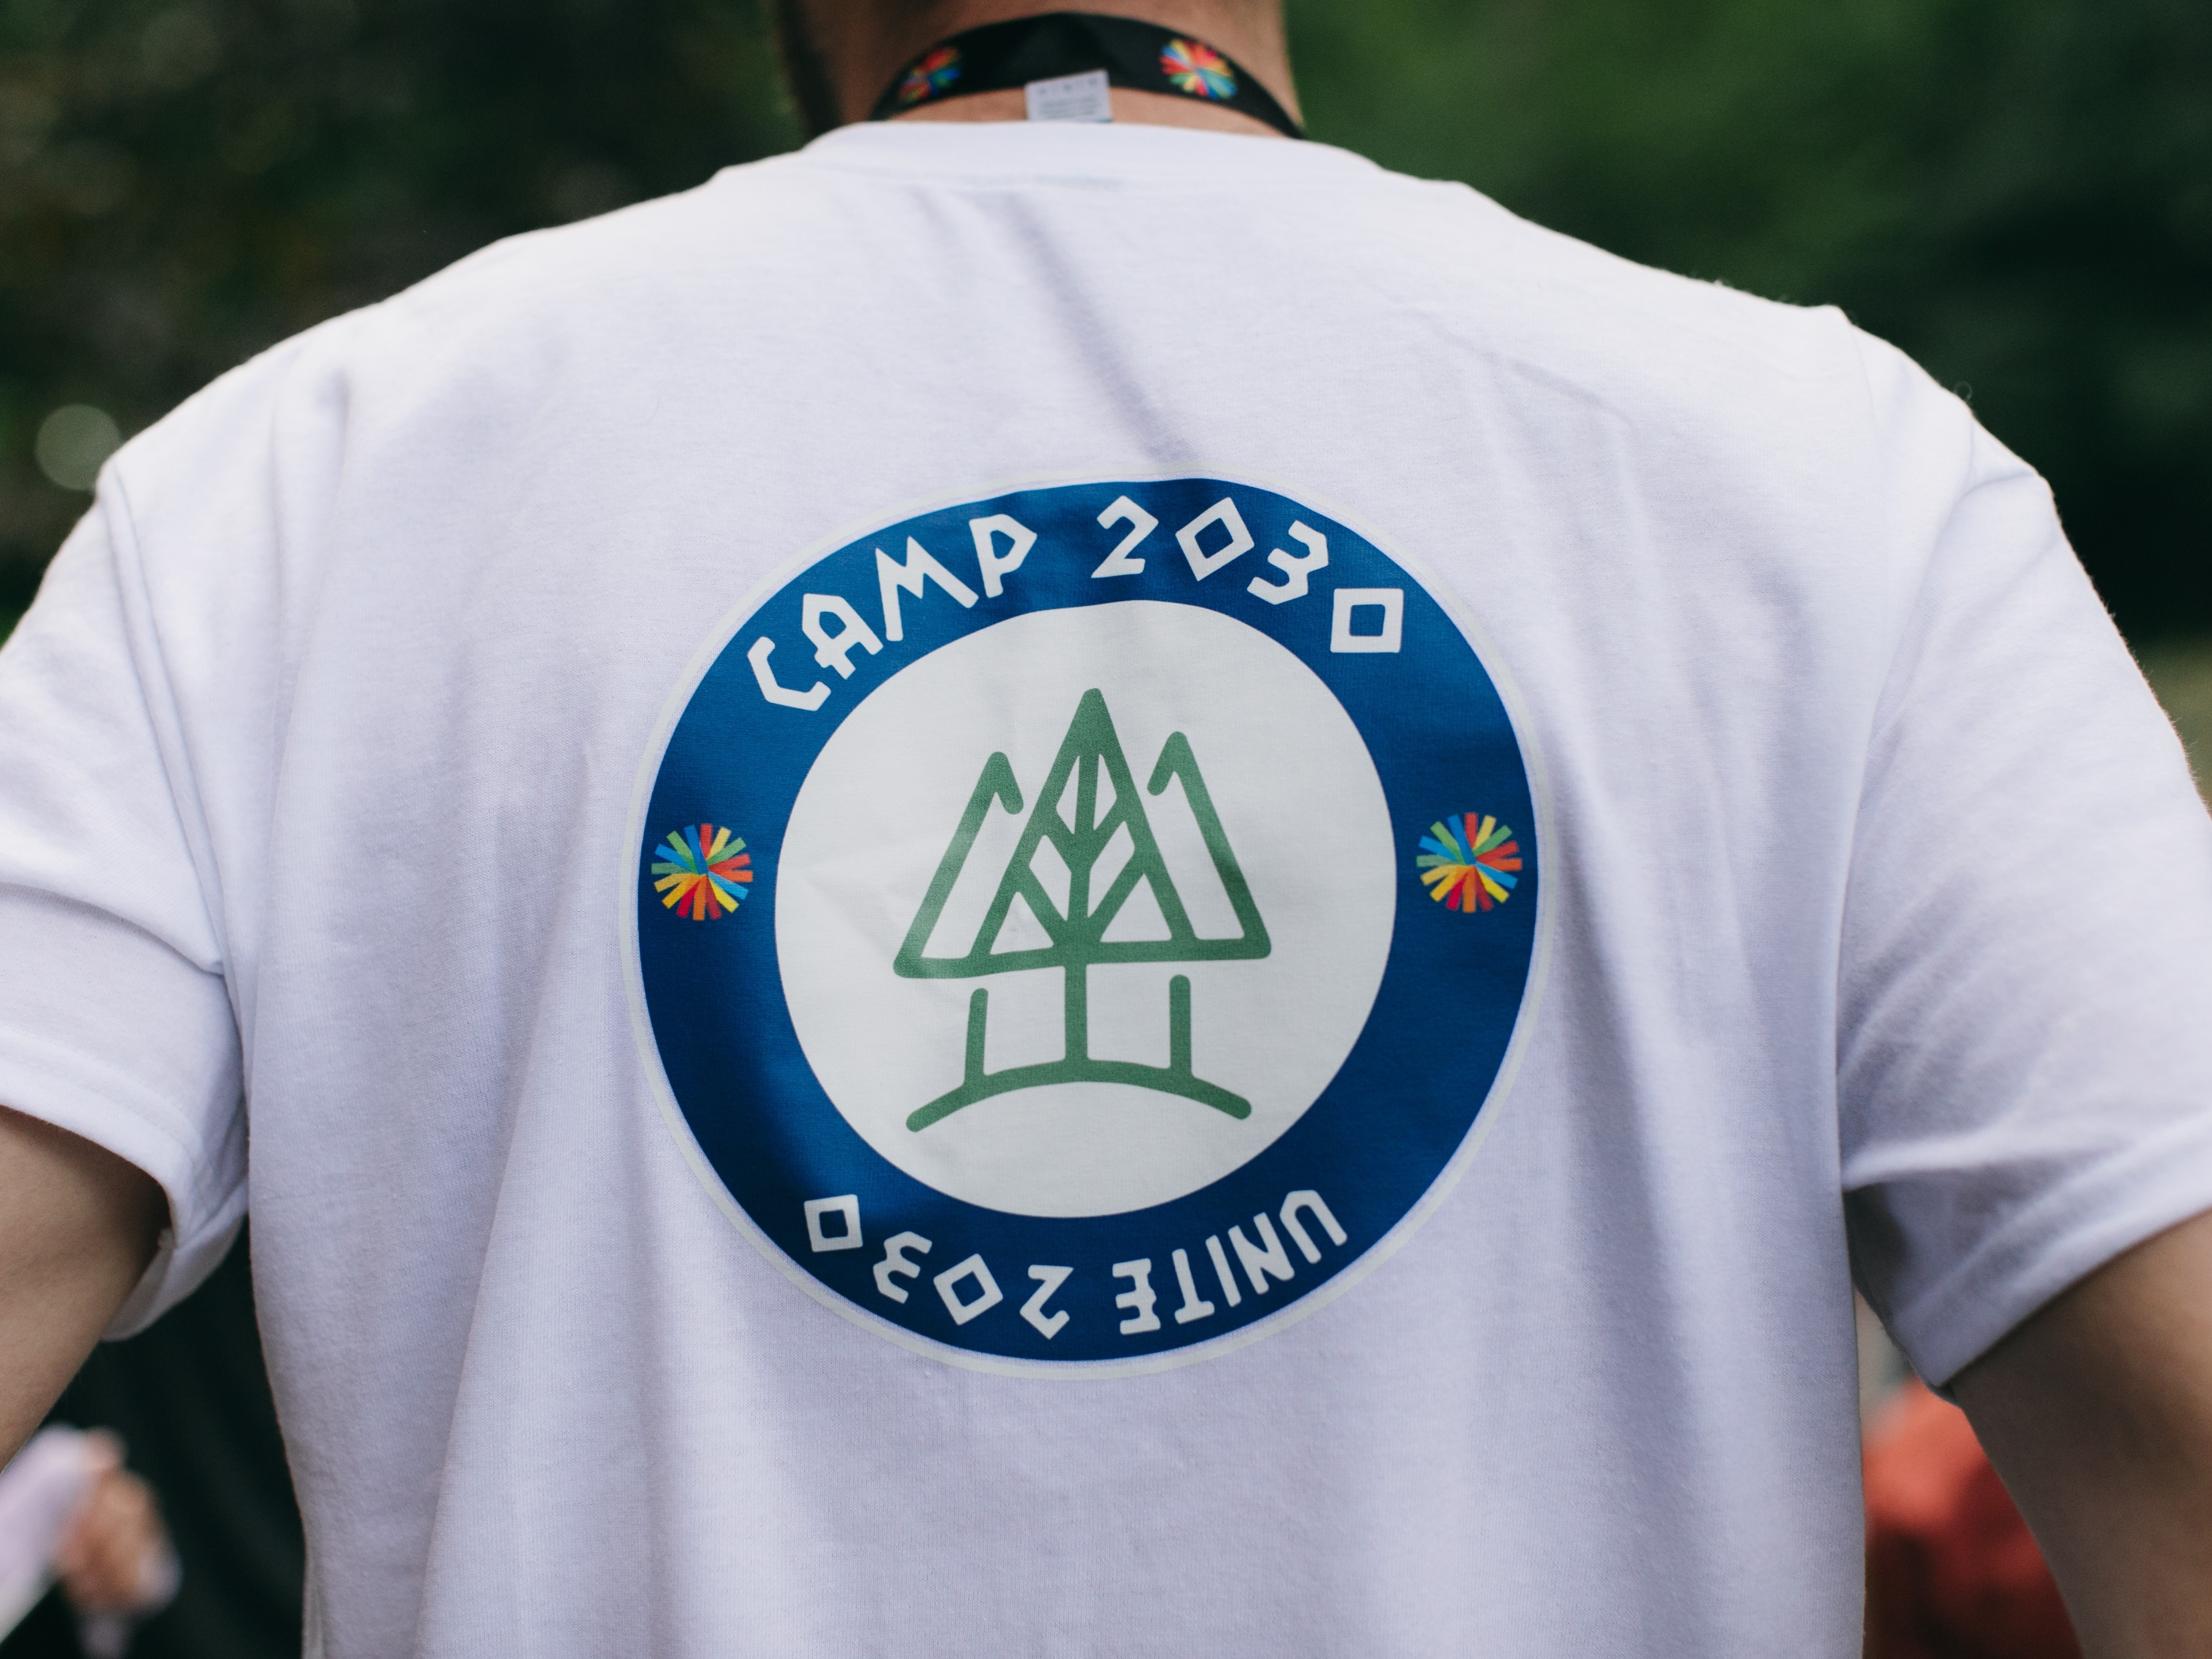 The Camp 2030 Experience